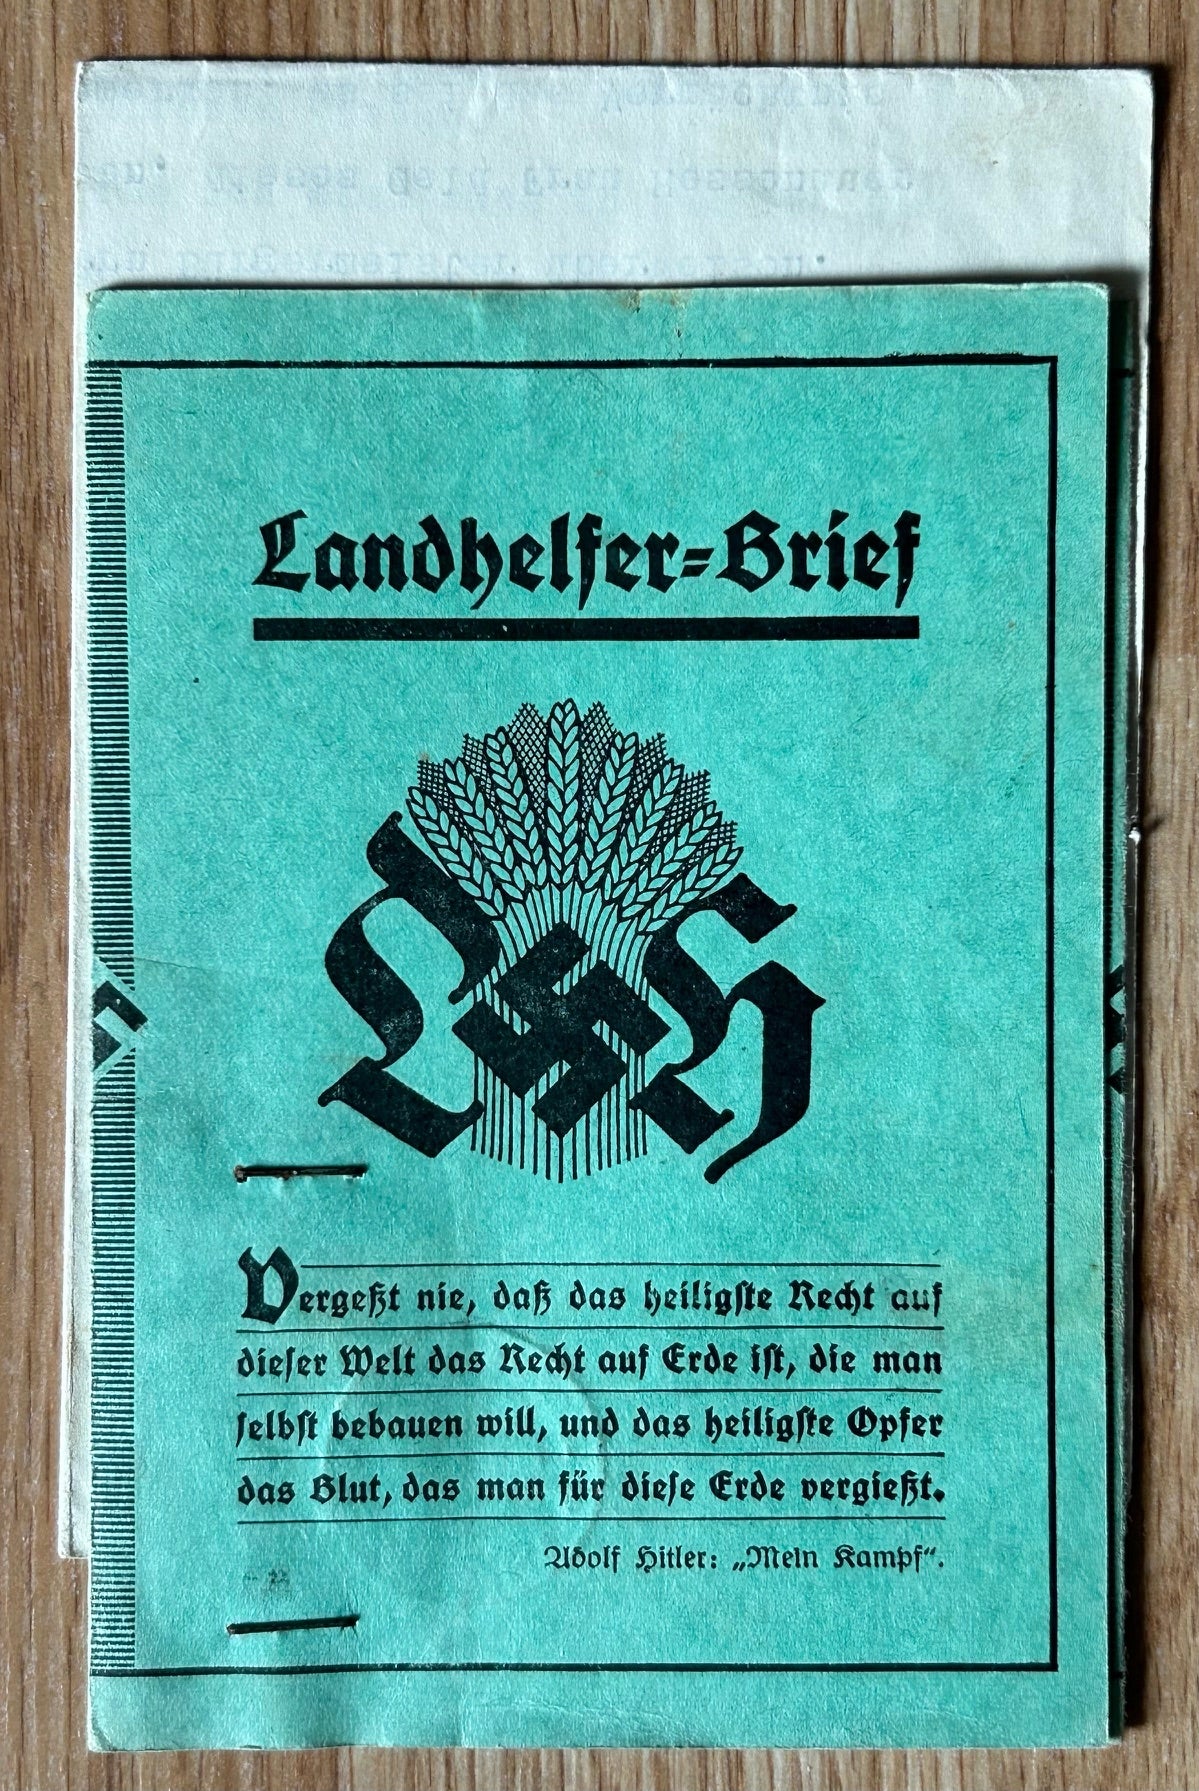 Landhelfer Brief - Land service ID card with condolence letter